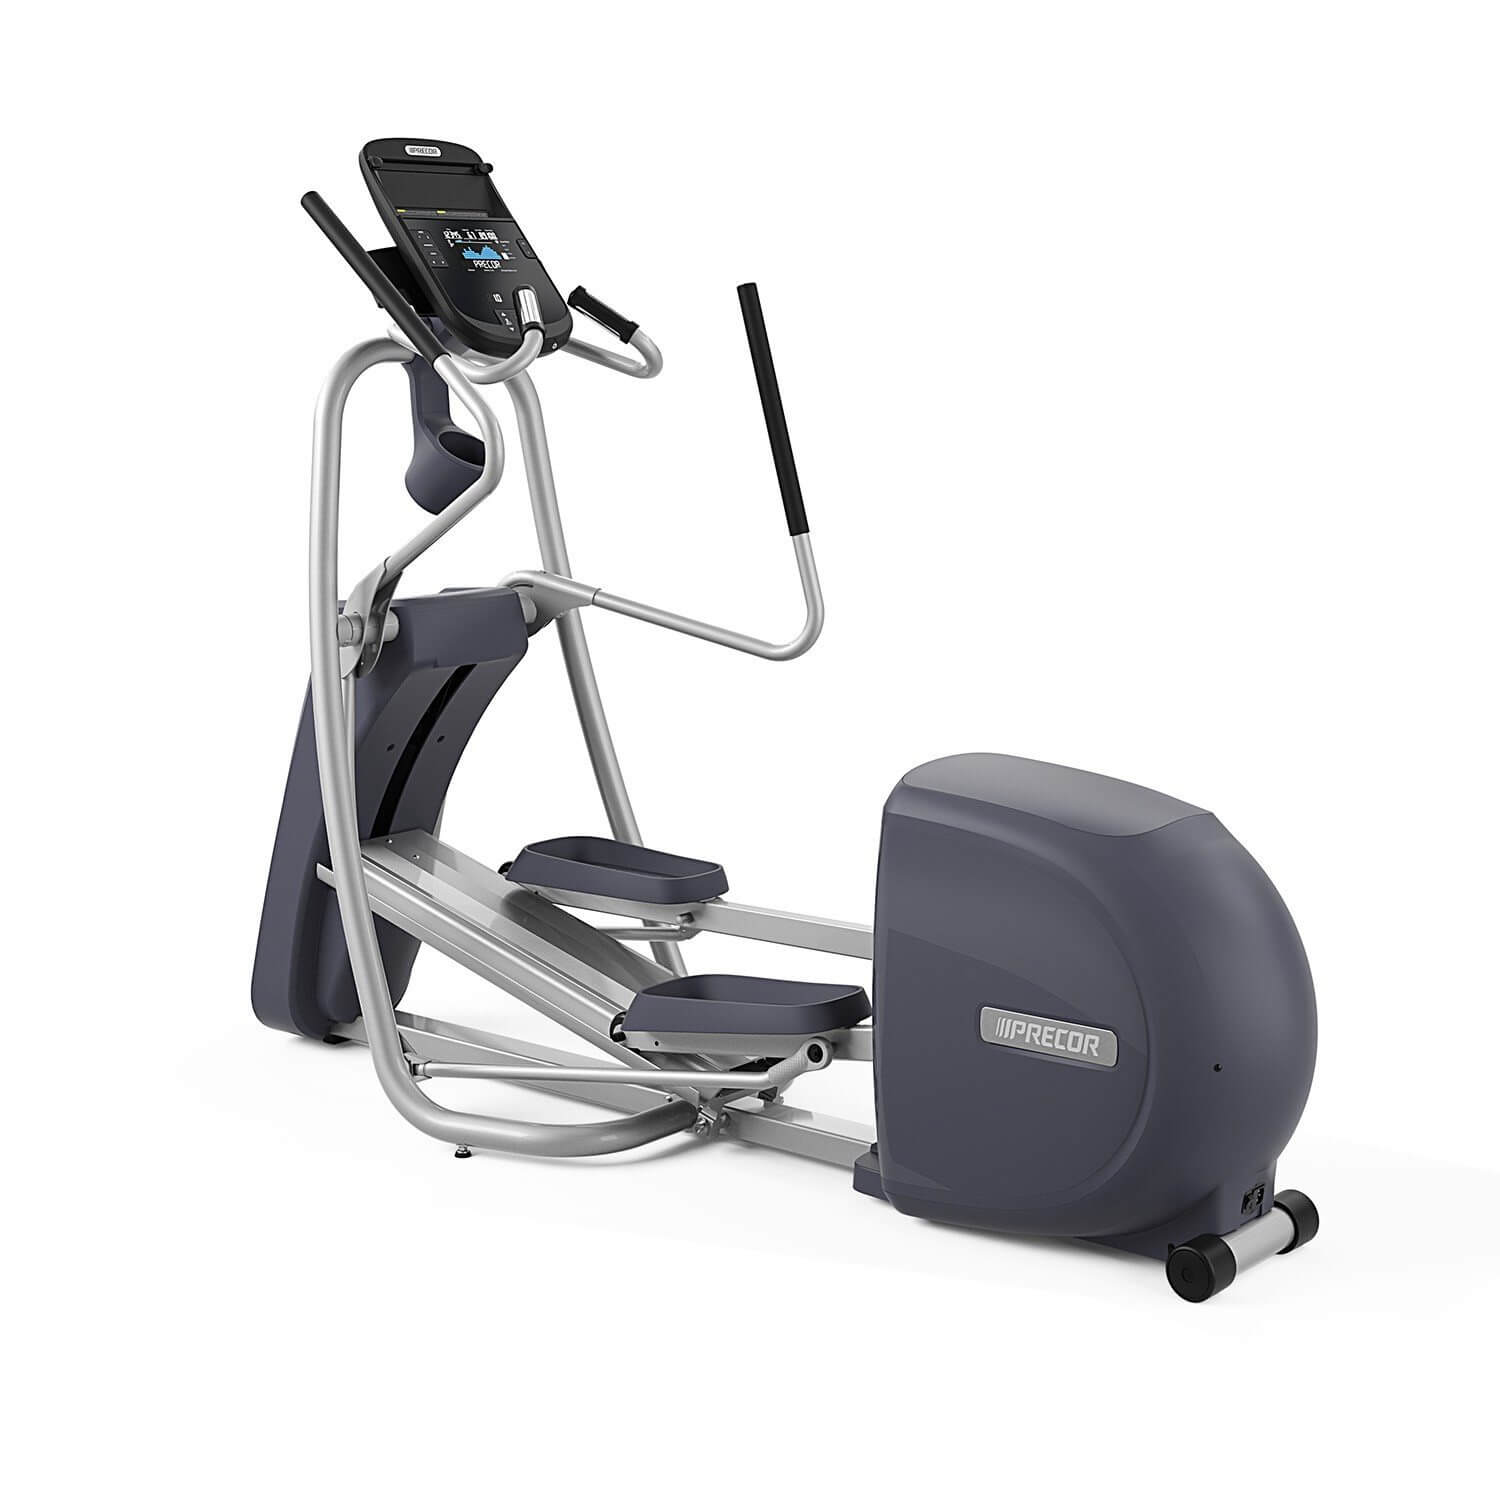 Elliptical Exercise Machine vs Treadmill: Which is Better?